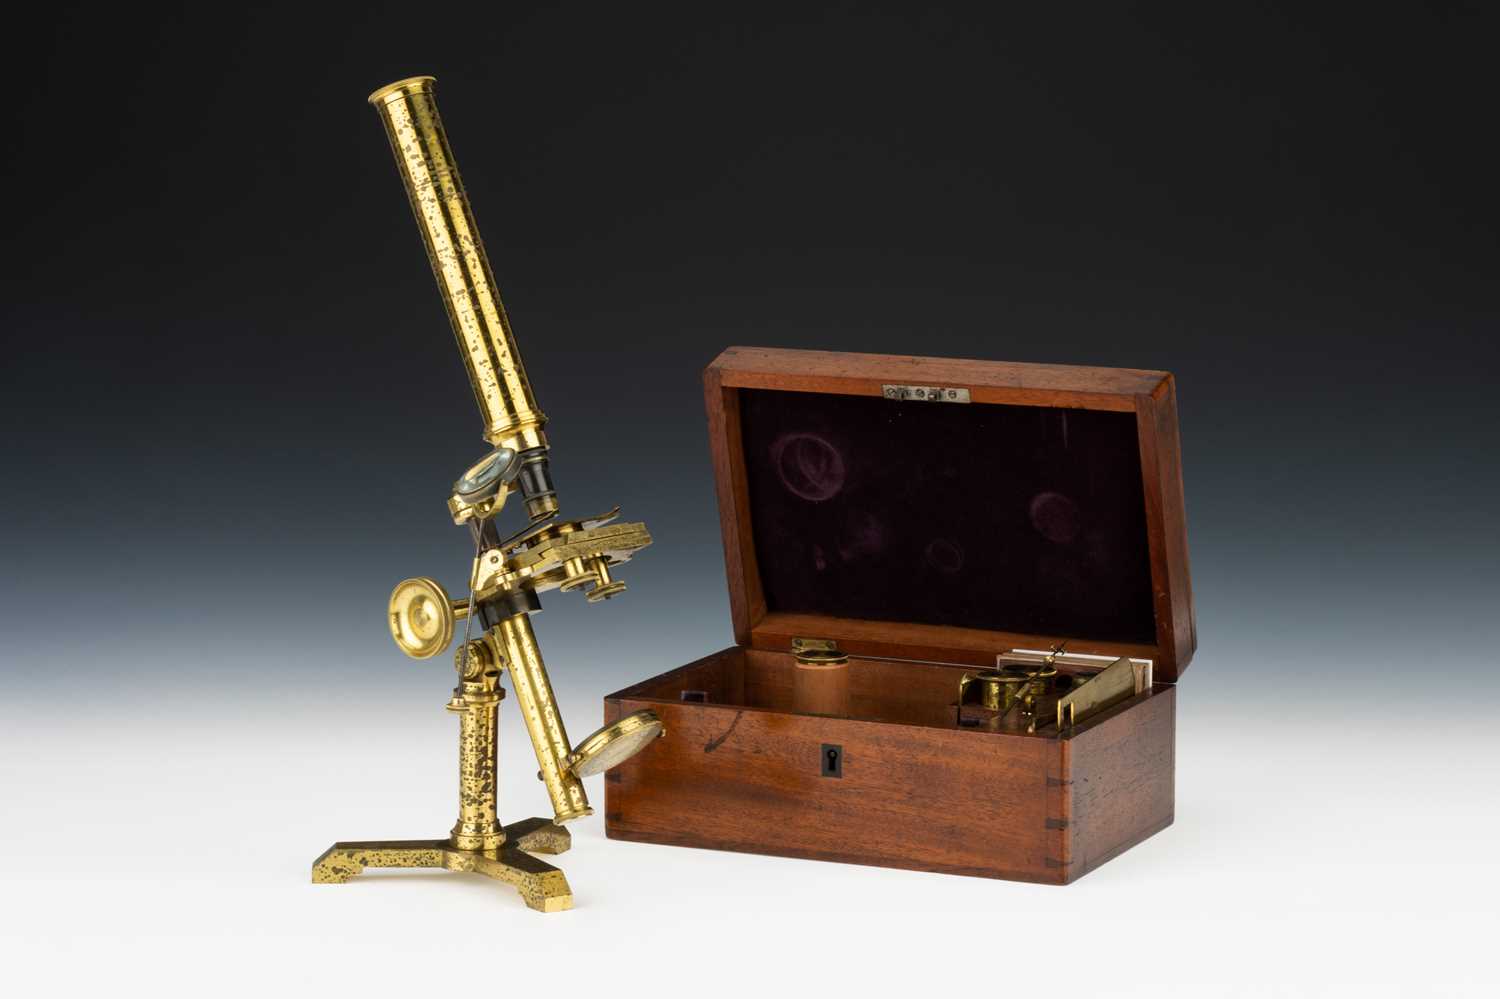 Lot 102 - An Early Achromatic Microscope By Casella & Co, London